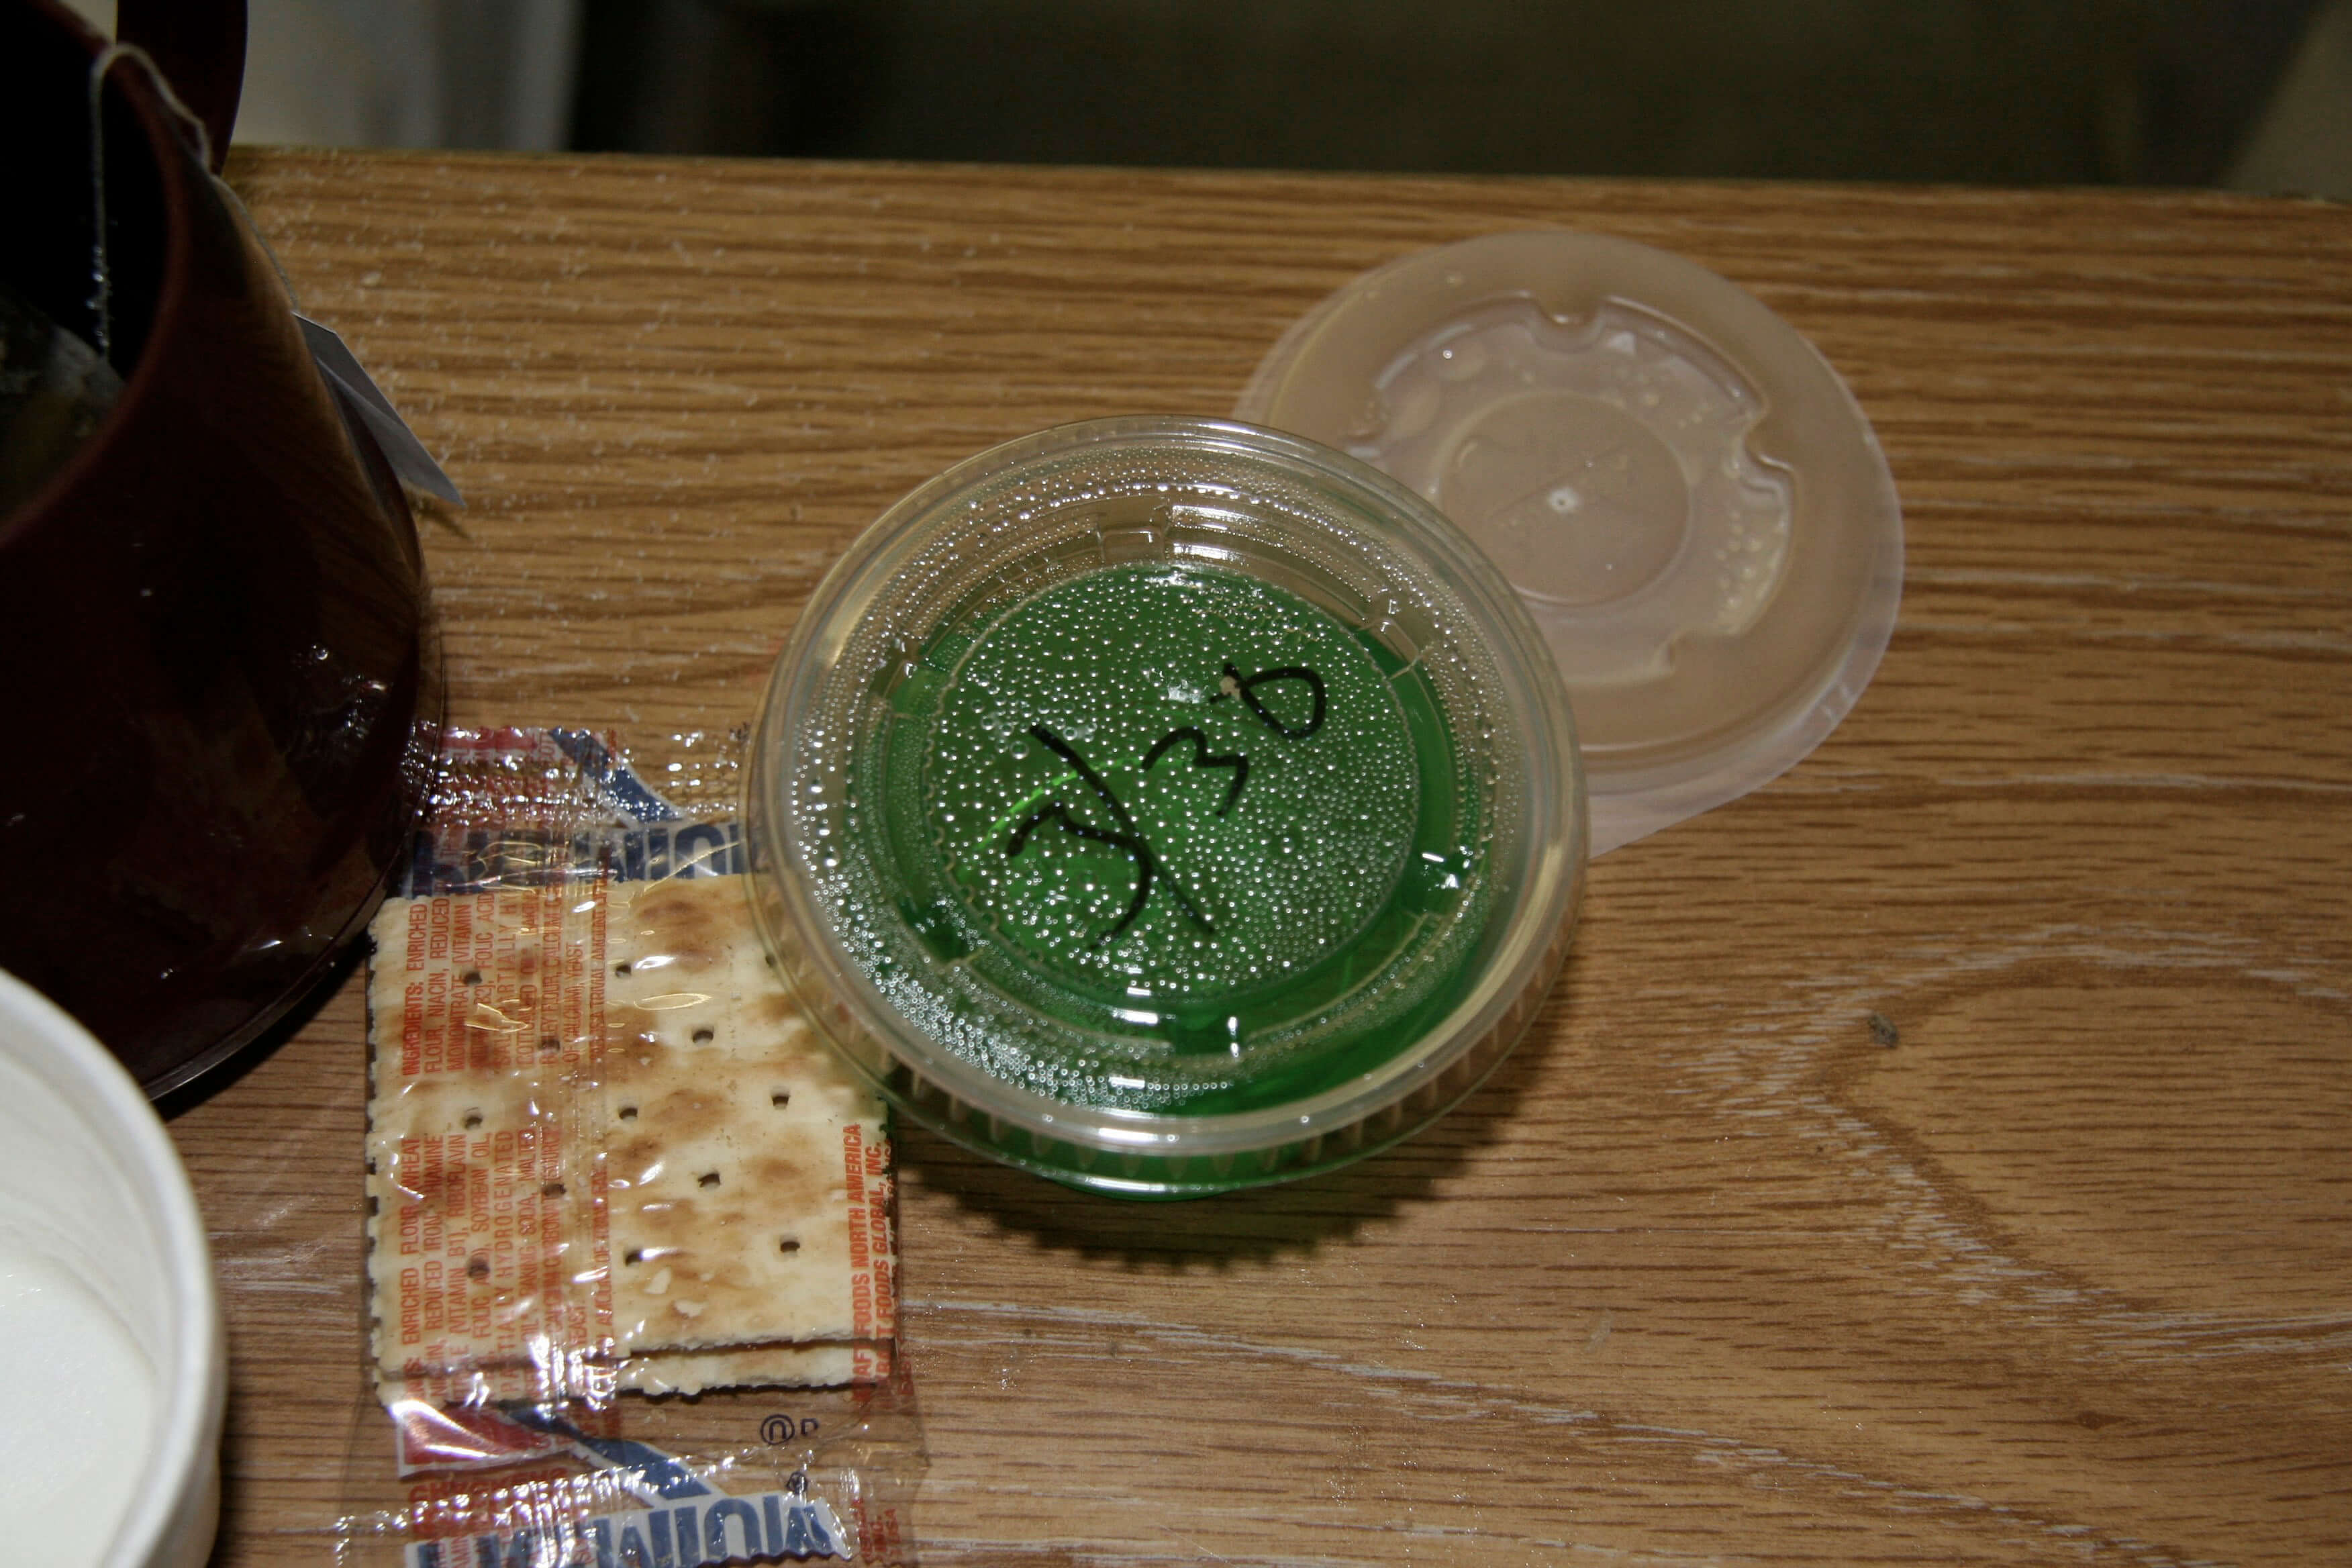 Still from The Patron Saints. A close-up shot of a packet of saltines and green sauce in a plastic ramekin atop a table. The top of the ramekin has "3/30" written on it in black marker.